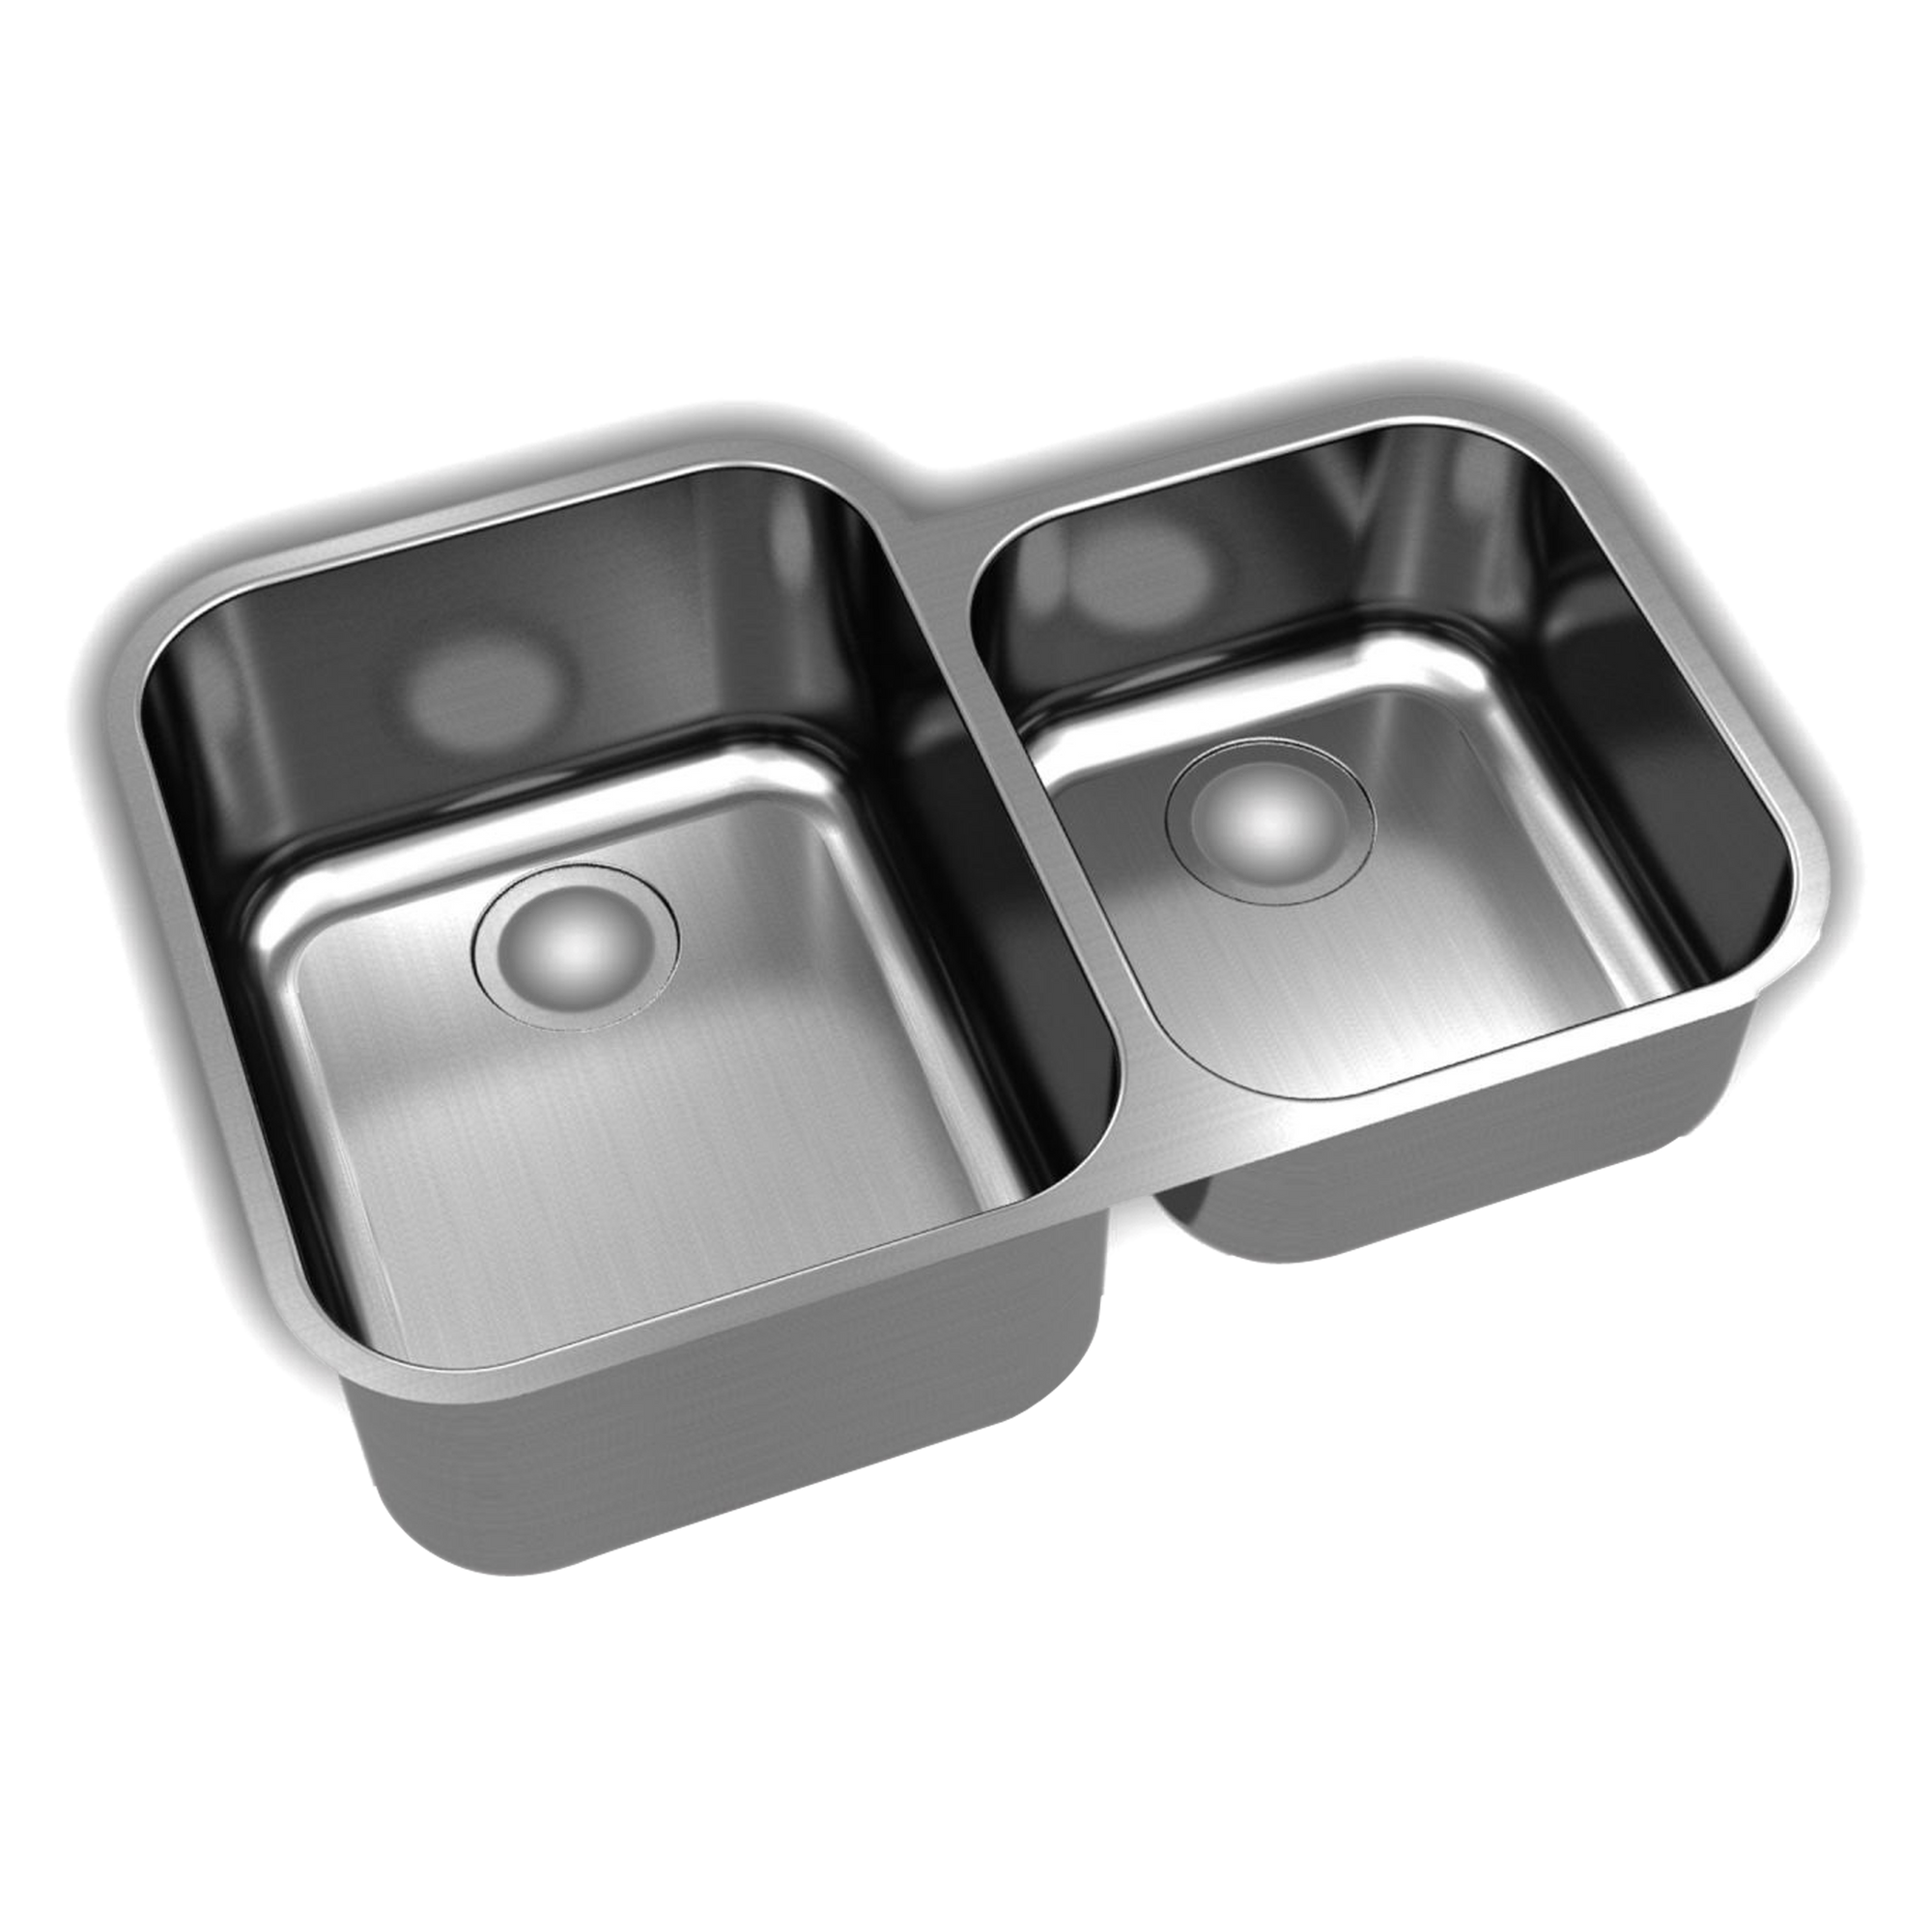 The kitchen sink is a home essential! Stainless steel kitchen sink, 1-1/2 bowl, with the large bowl on the left.